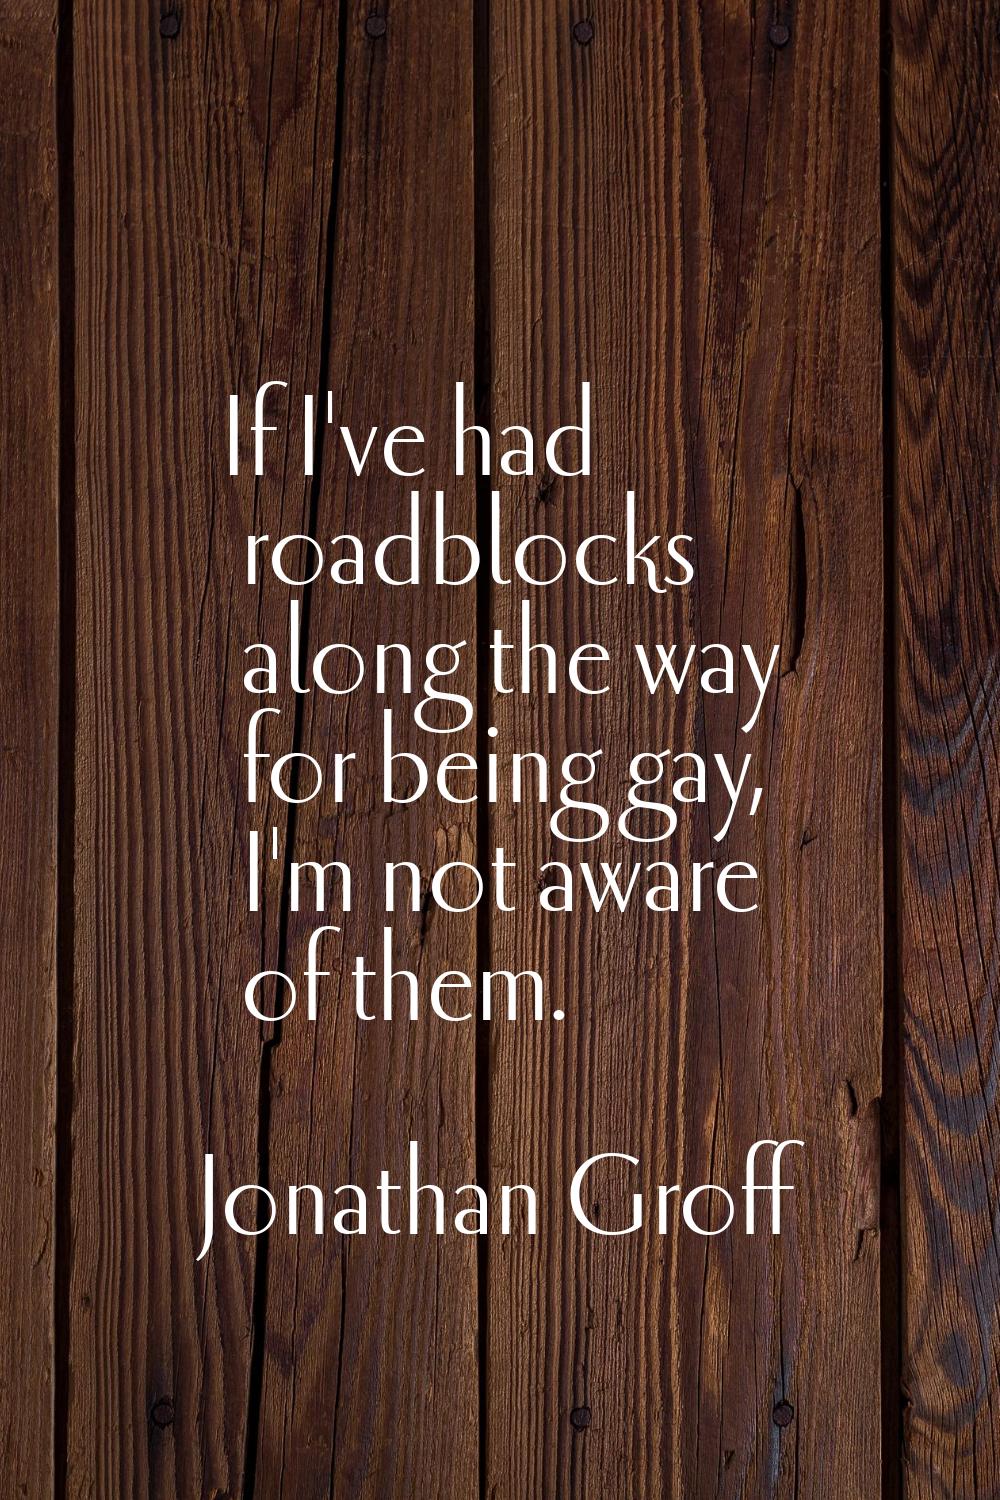 If I've had roadblocks along the way for being gay, I'm not aware of them.